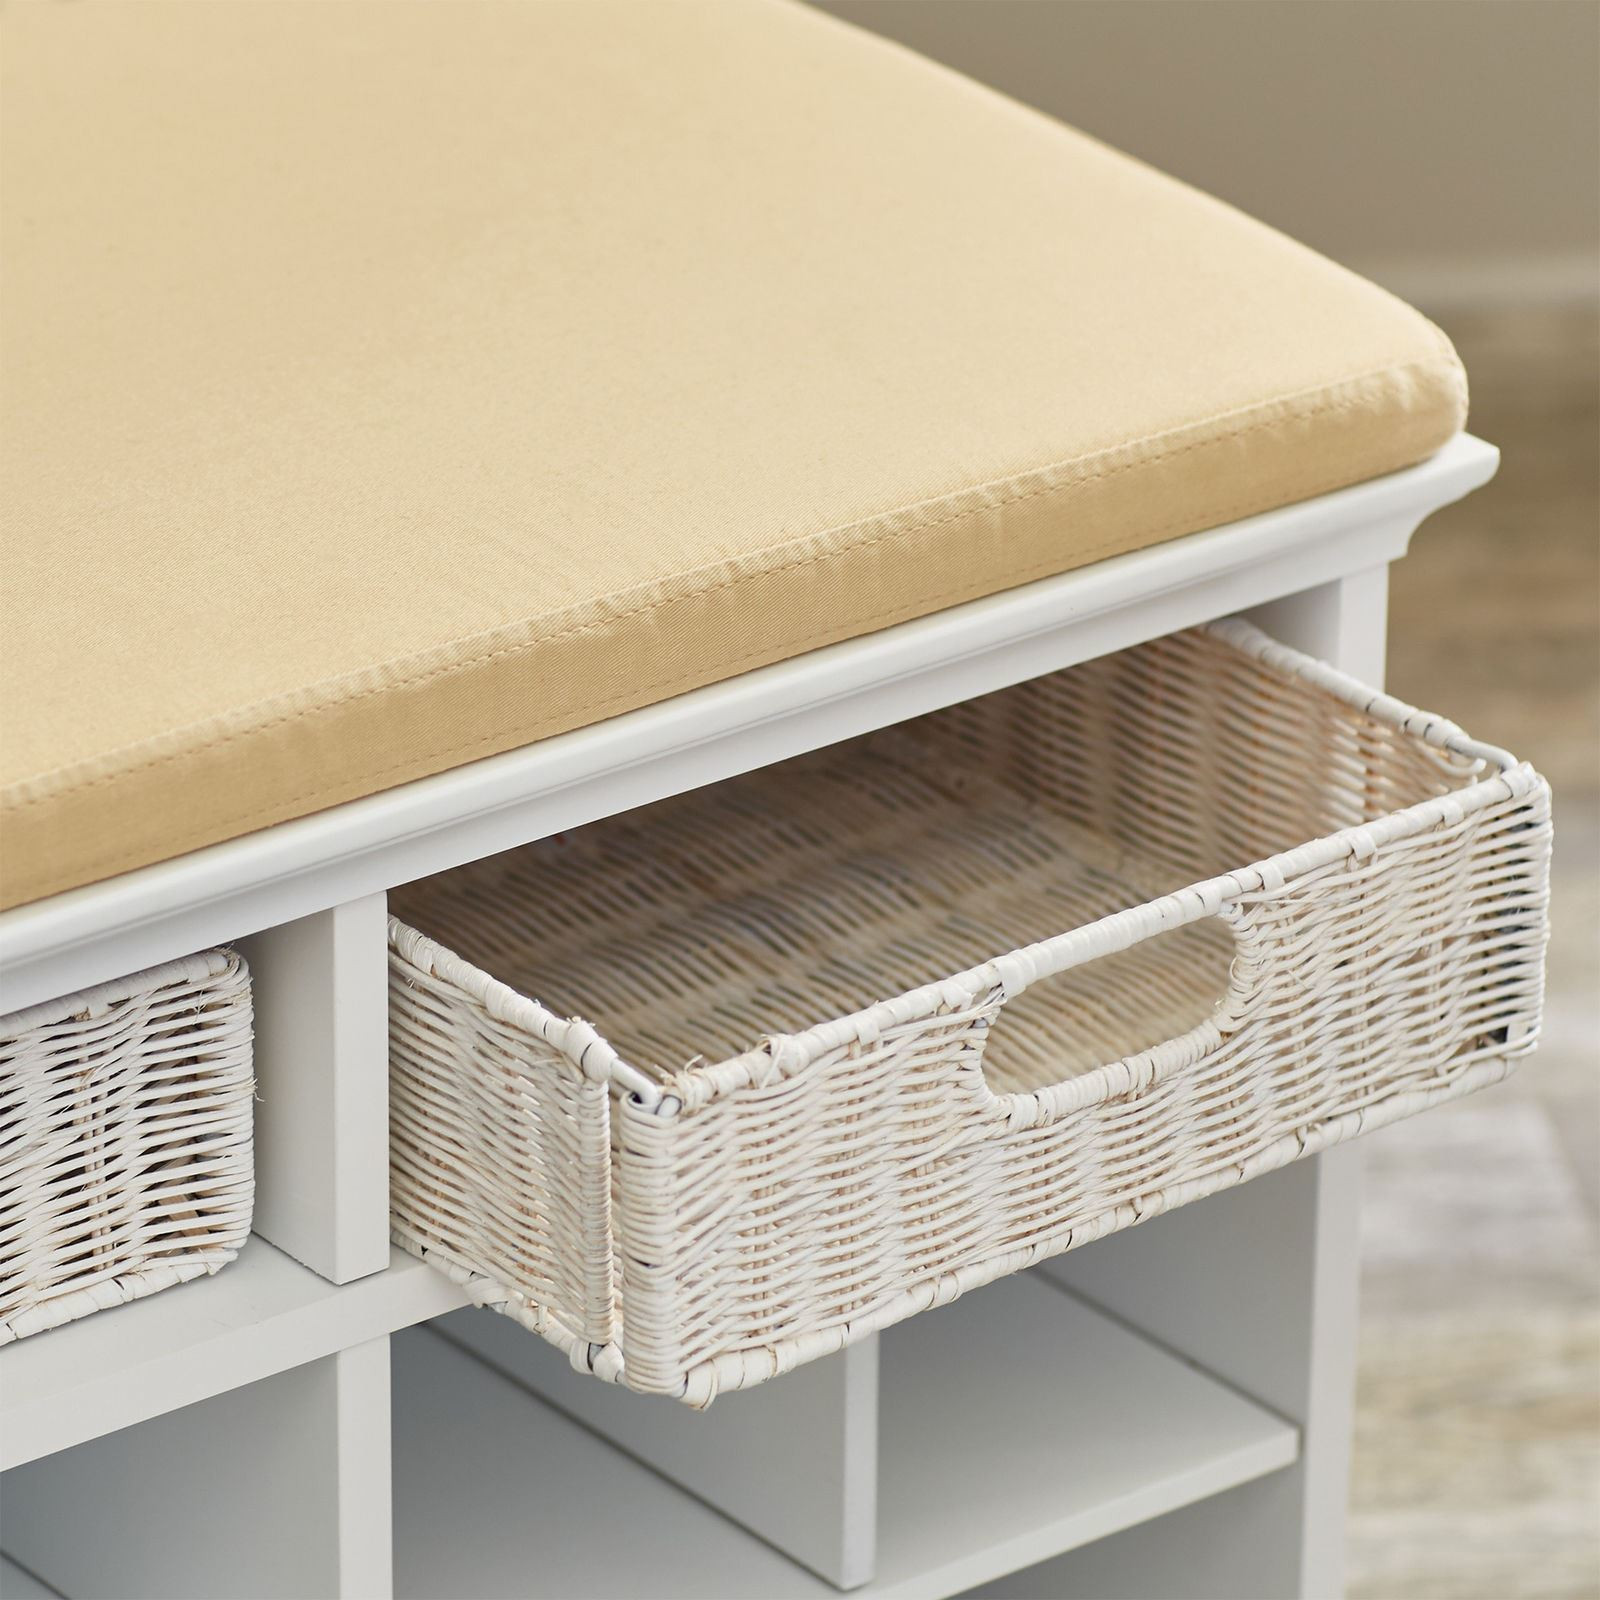 Bedroom Bench With Shoe Storage
 NEW White Wooden Shoe Storage Bench Seat Entryway Mud Room